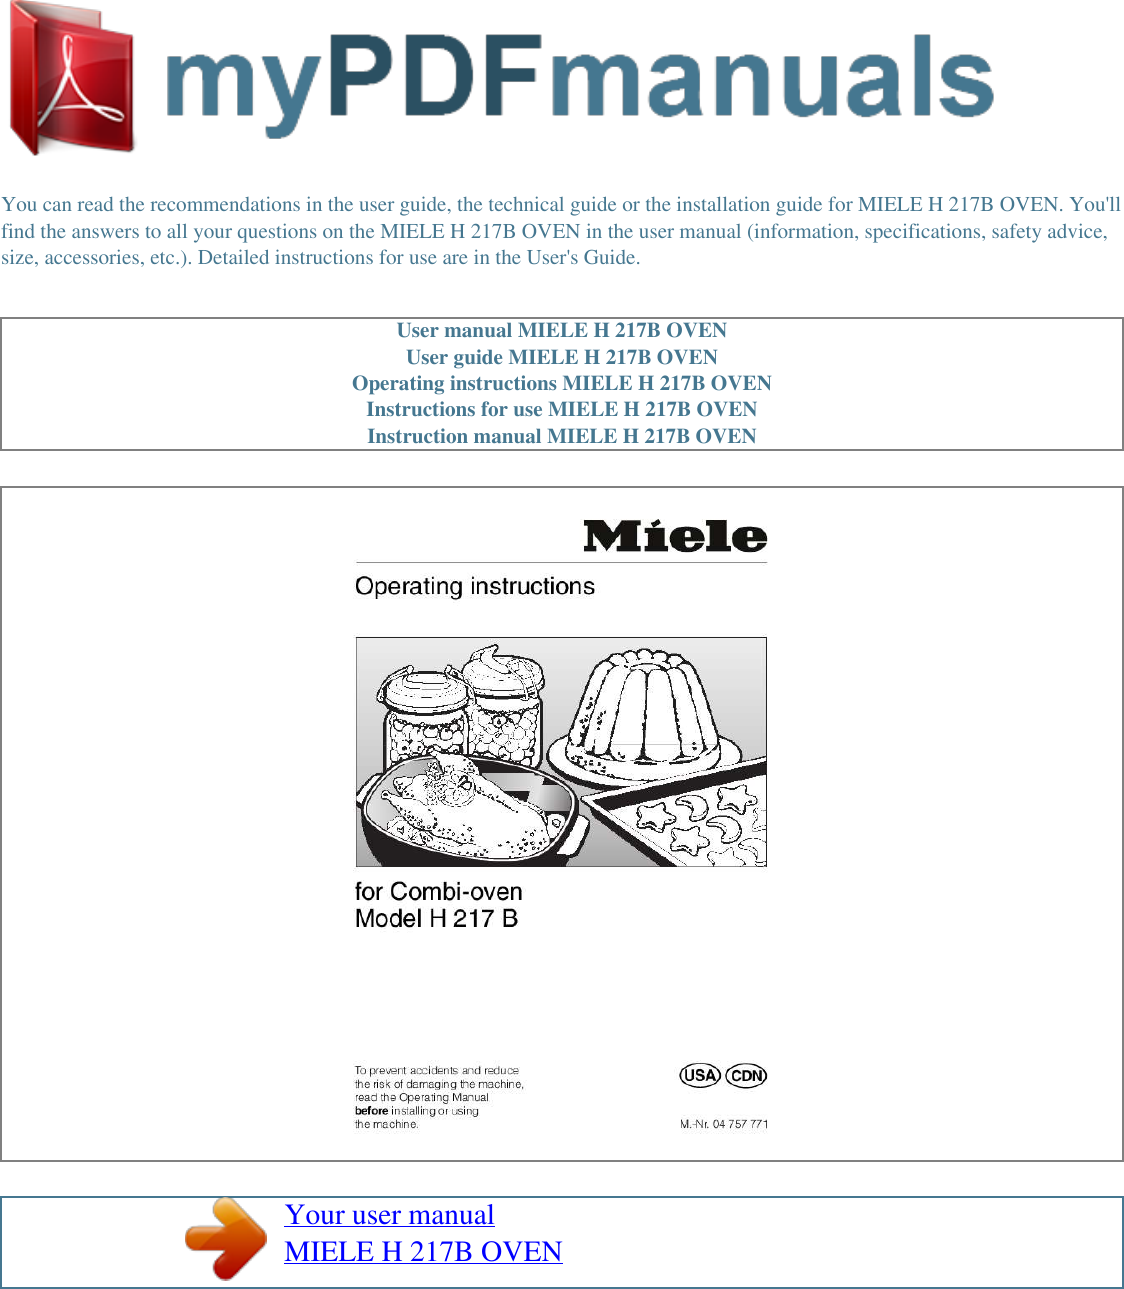 Page 1 of 2 - Miele Miele-Oven-H-217-B-Users-Manual- User Manual H 217B OVEN  Miele-oven-h-217-b-users-manual